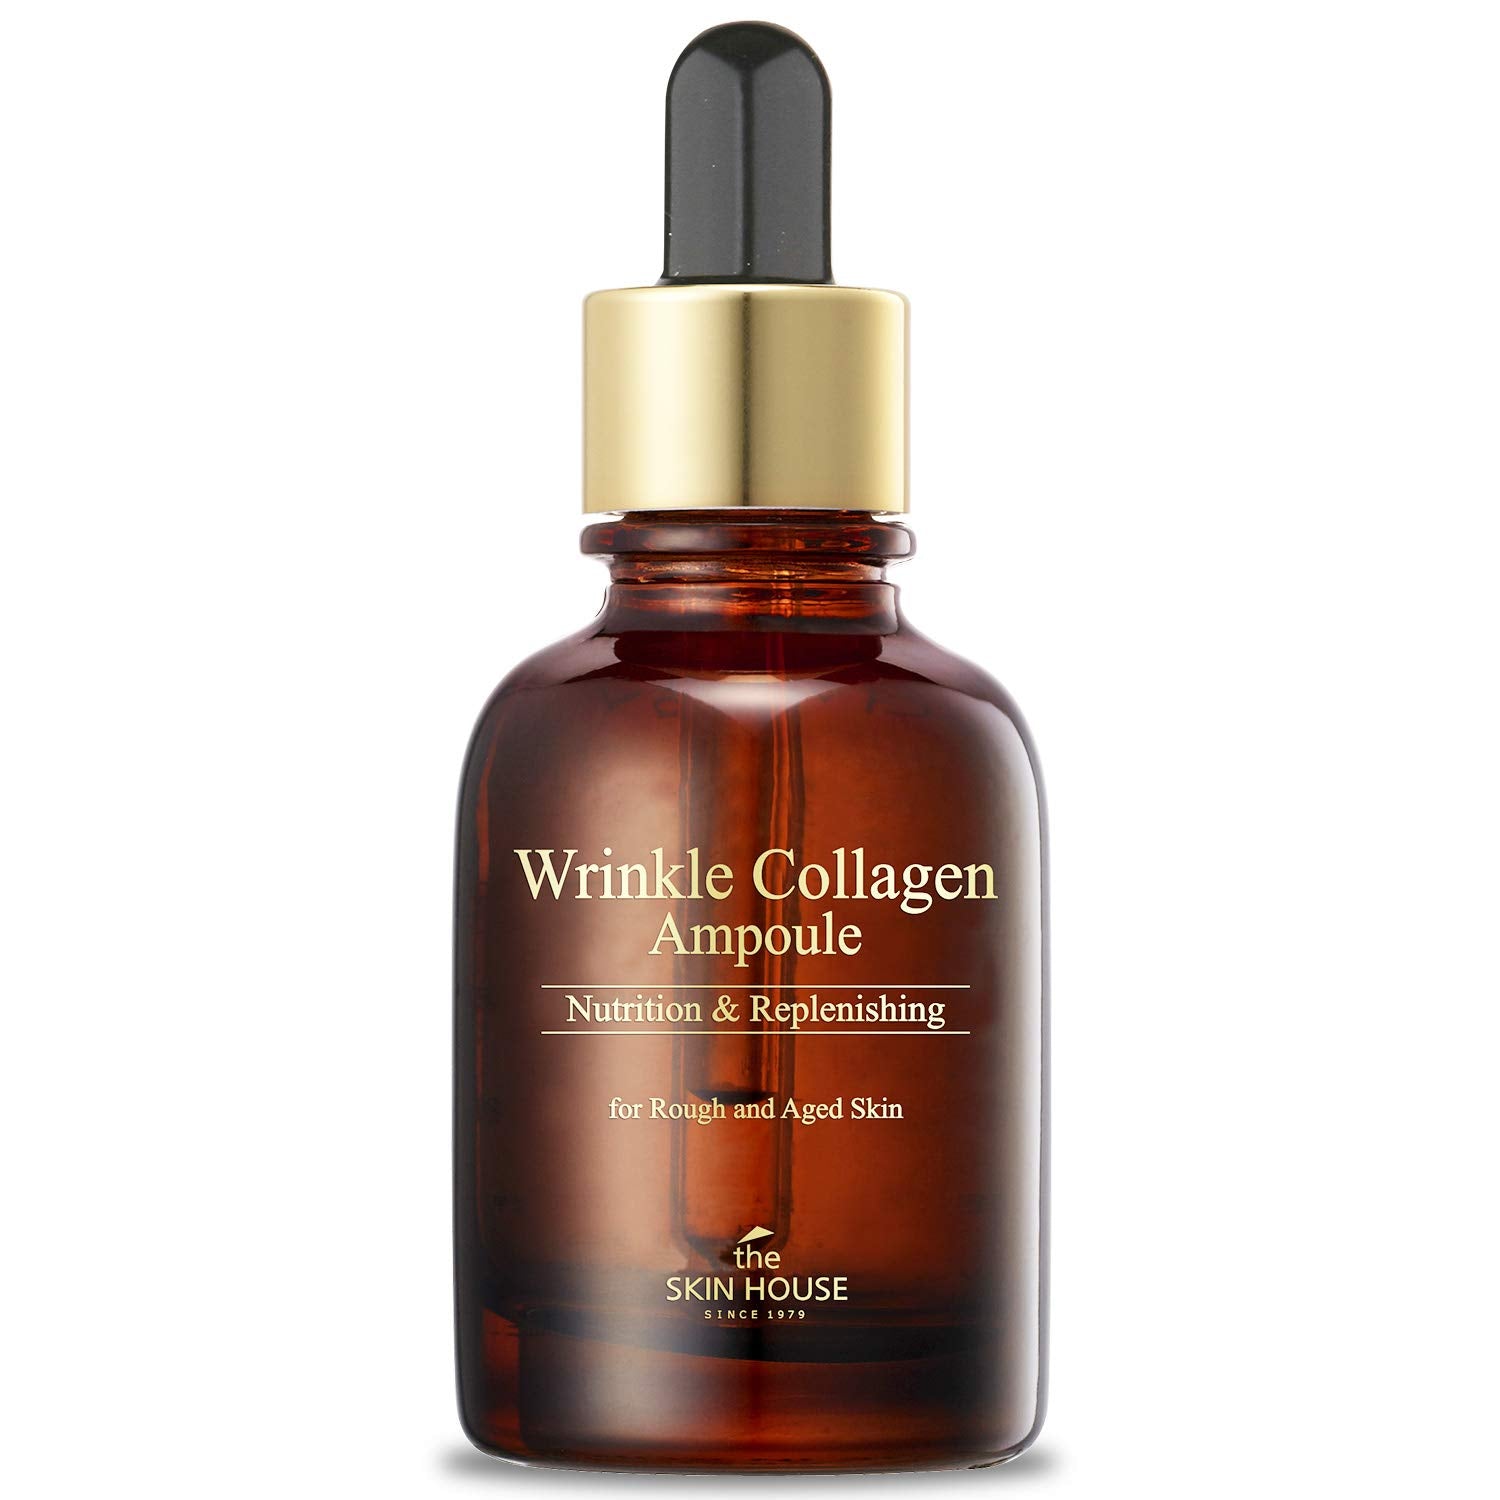 the SKIN HOUSE Wrinkle Collagen Ampoule